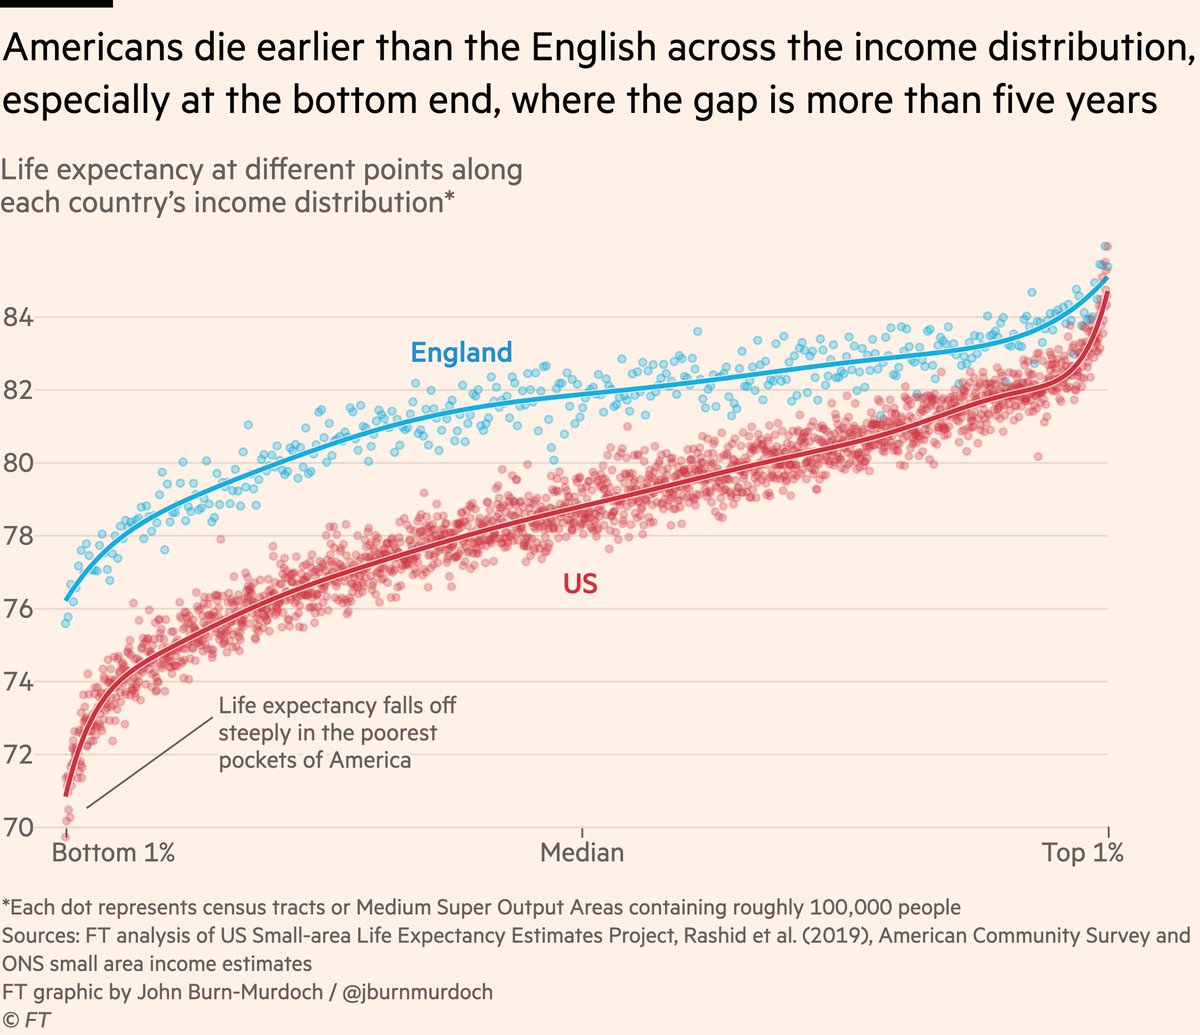 NEW: I’m not sure people fully appreciate how dire the US life expectancy / mortality situation has got. My column: enterprise-sharing.ft.com/redeem/75e5e3d… And some utterly damning charts. 1) at *every* point on the income distribution, Americans live shorter lives than the English.